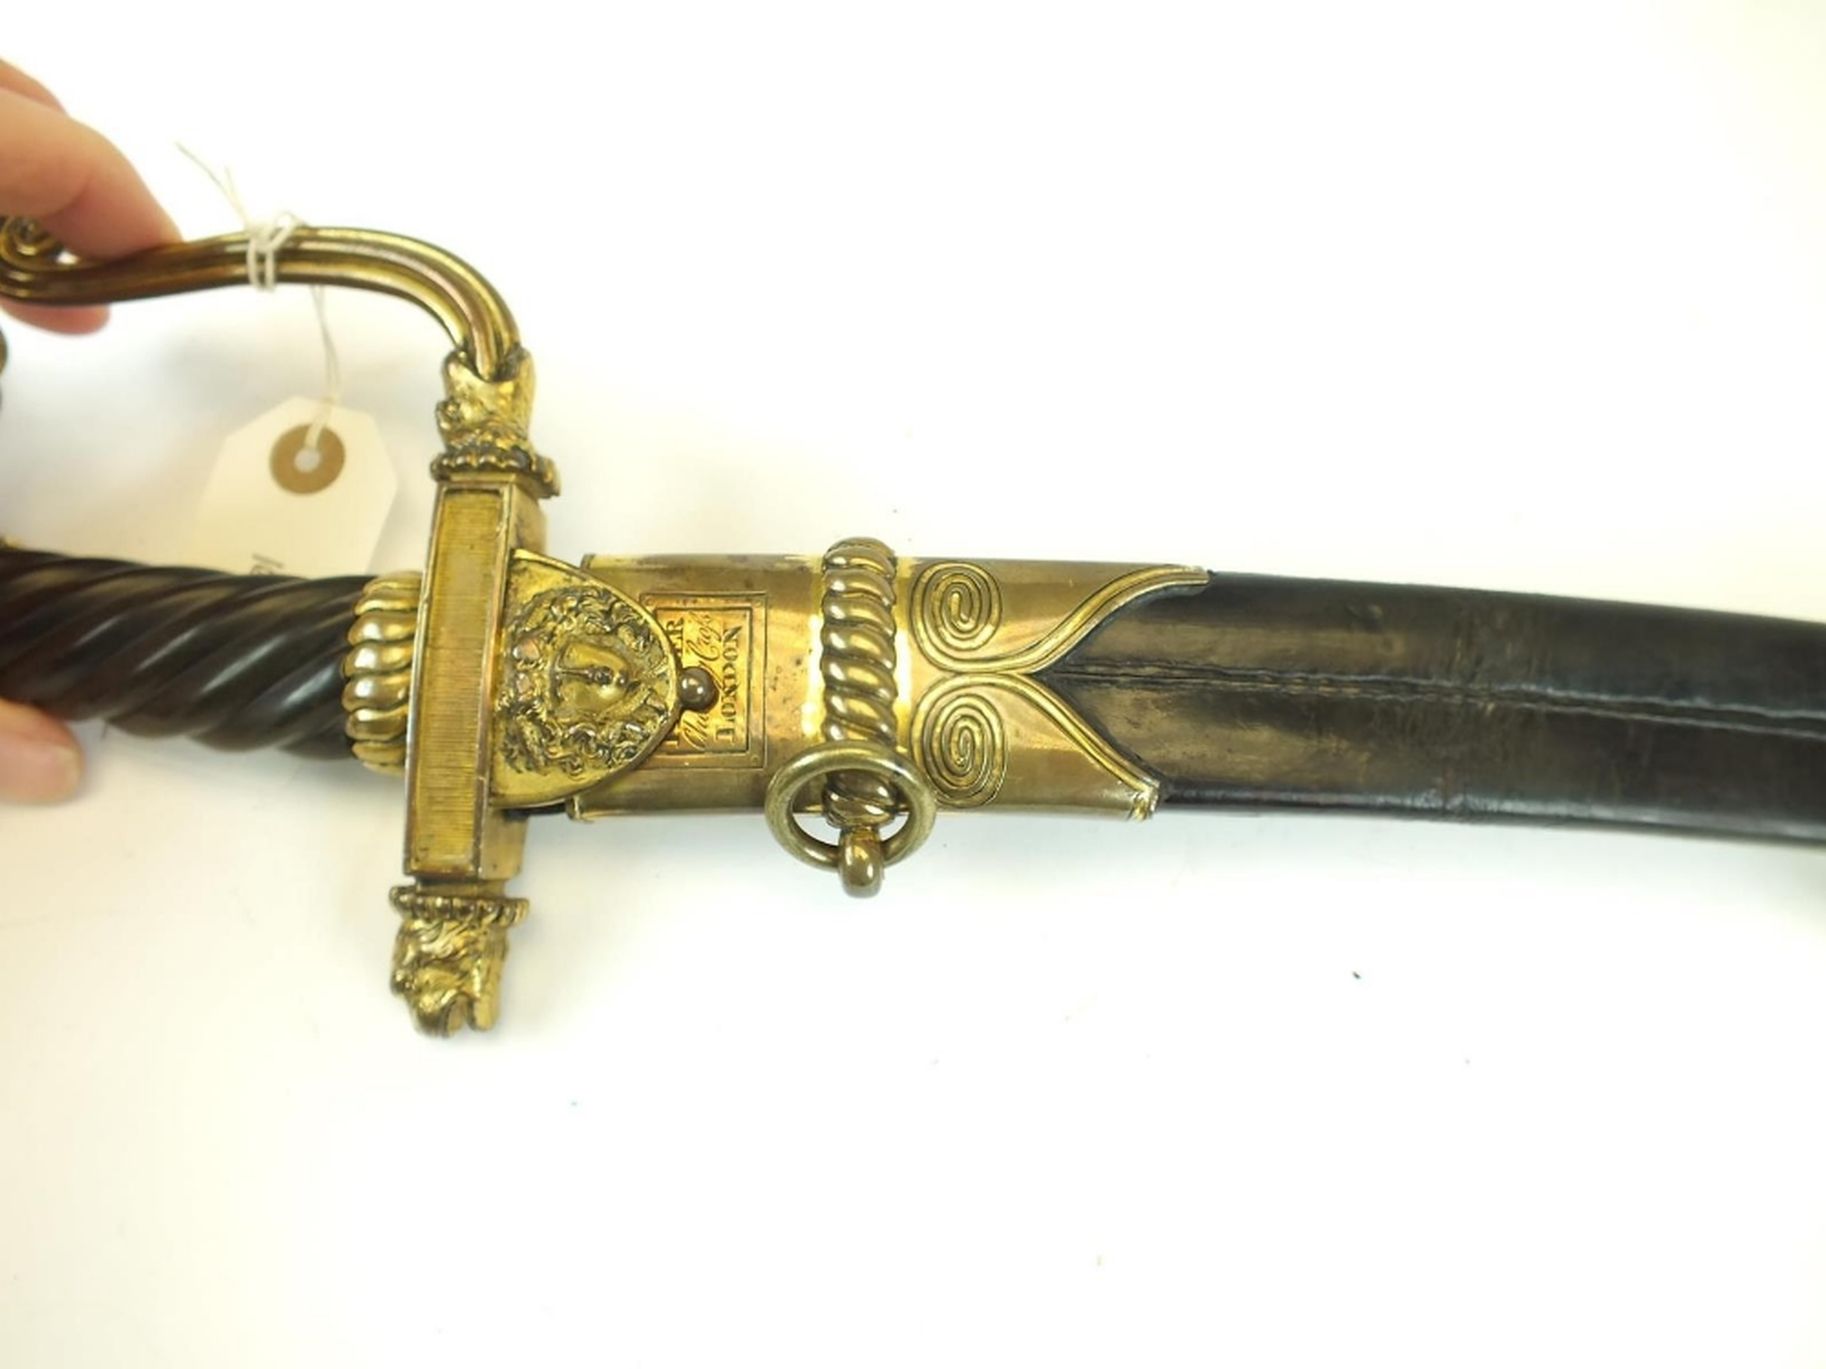 A LATE 18TH OR EARLY 19TH CENTURY PRESENTATION QUALITY SABRE BY PROSSER, 83cm sharply curved pipe- - Image 10 of 18